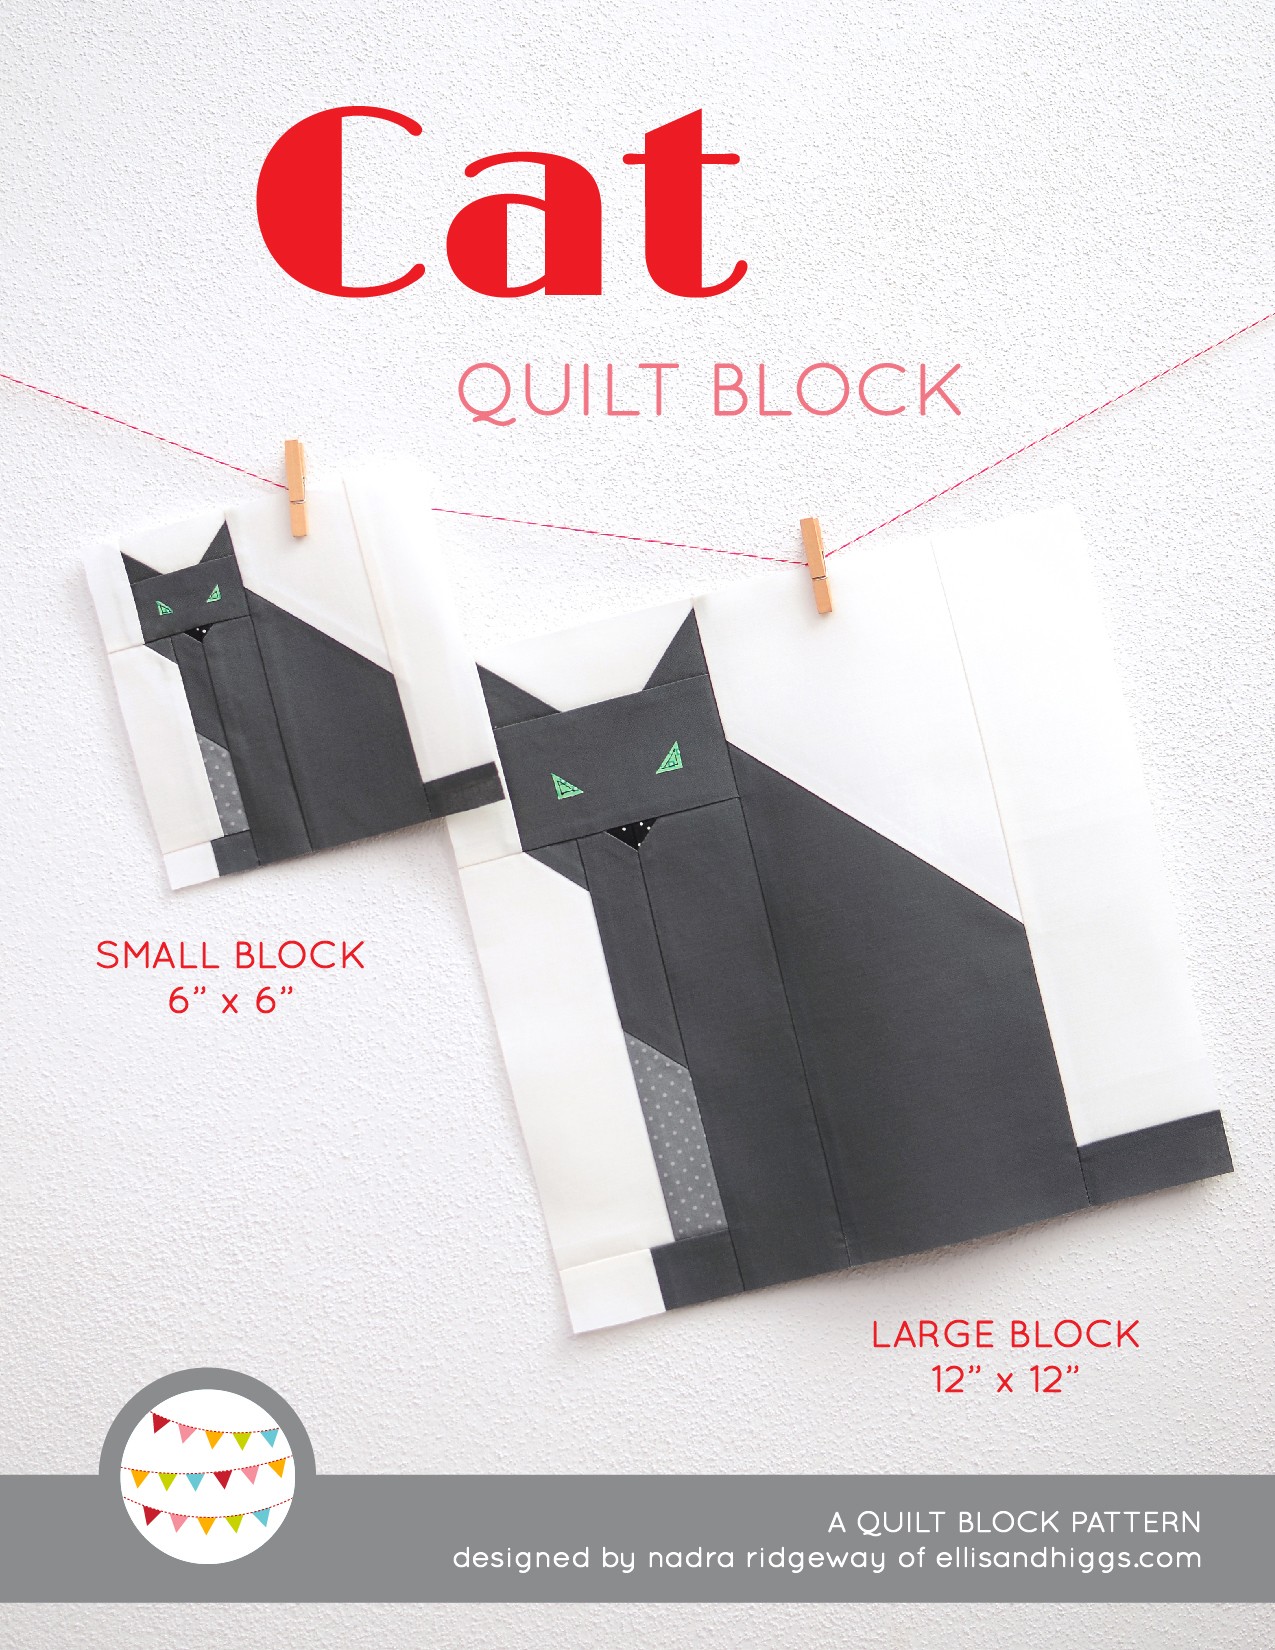 Cat quilt block in two sizes hanging on a wall